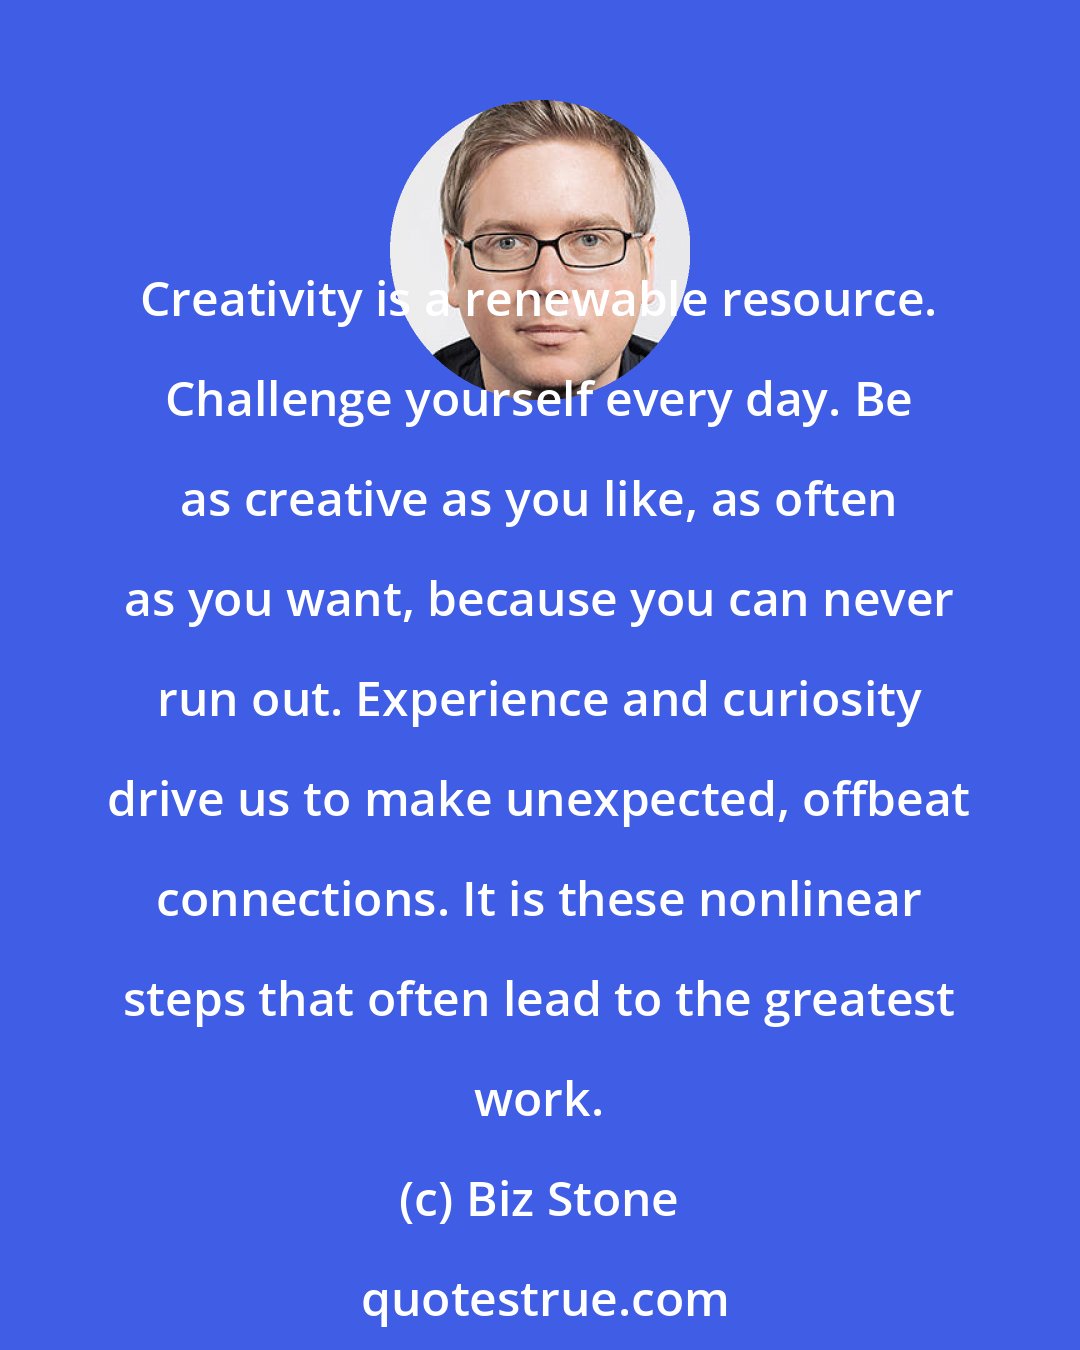 Biz Stone: Creativity is a renewable resource. Challenge yourself every day. Be as creative as you like, as often as you want, because you can never run out. Experience and curiosity drive us to make unexpected, offbeat connections. It is these nonlinear steps that often lead to the greatest work.